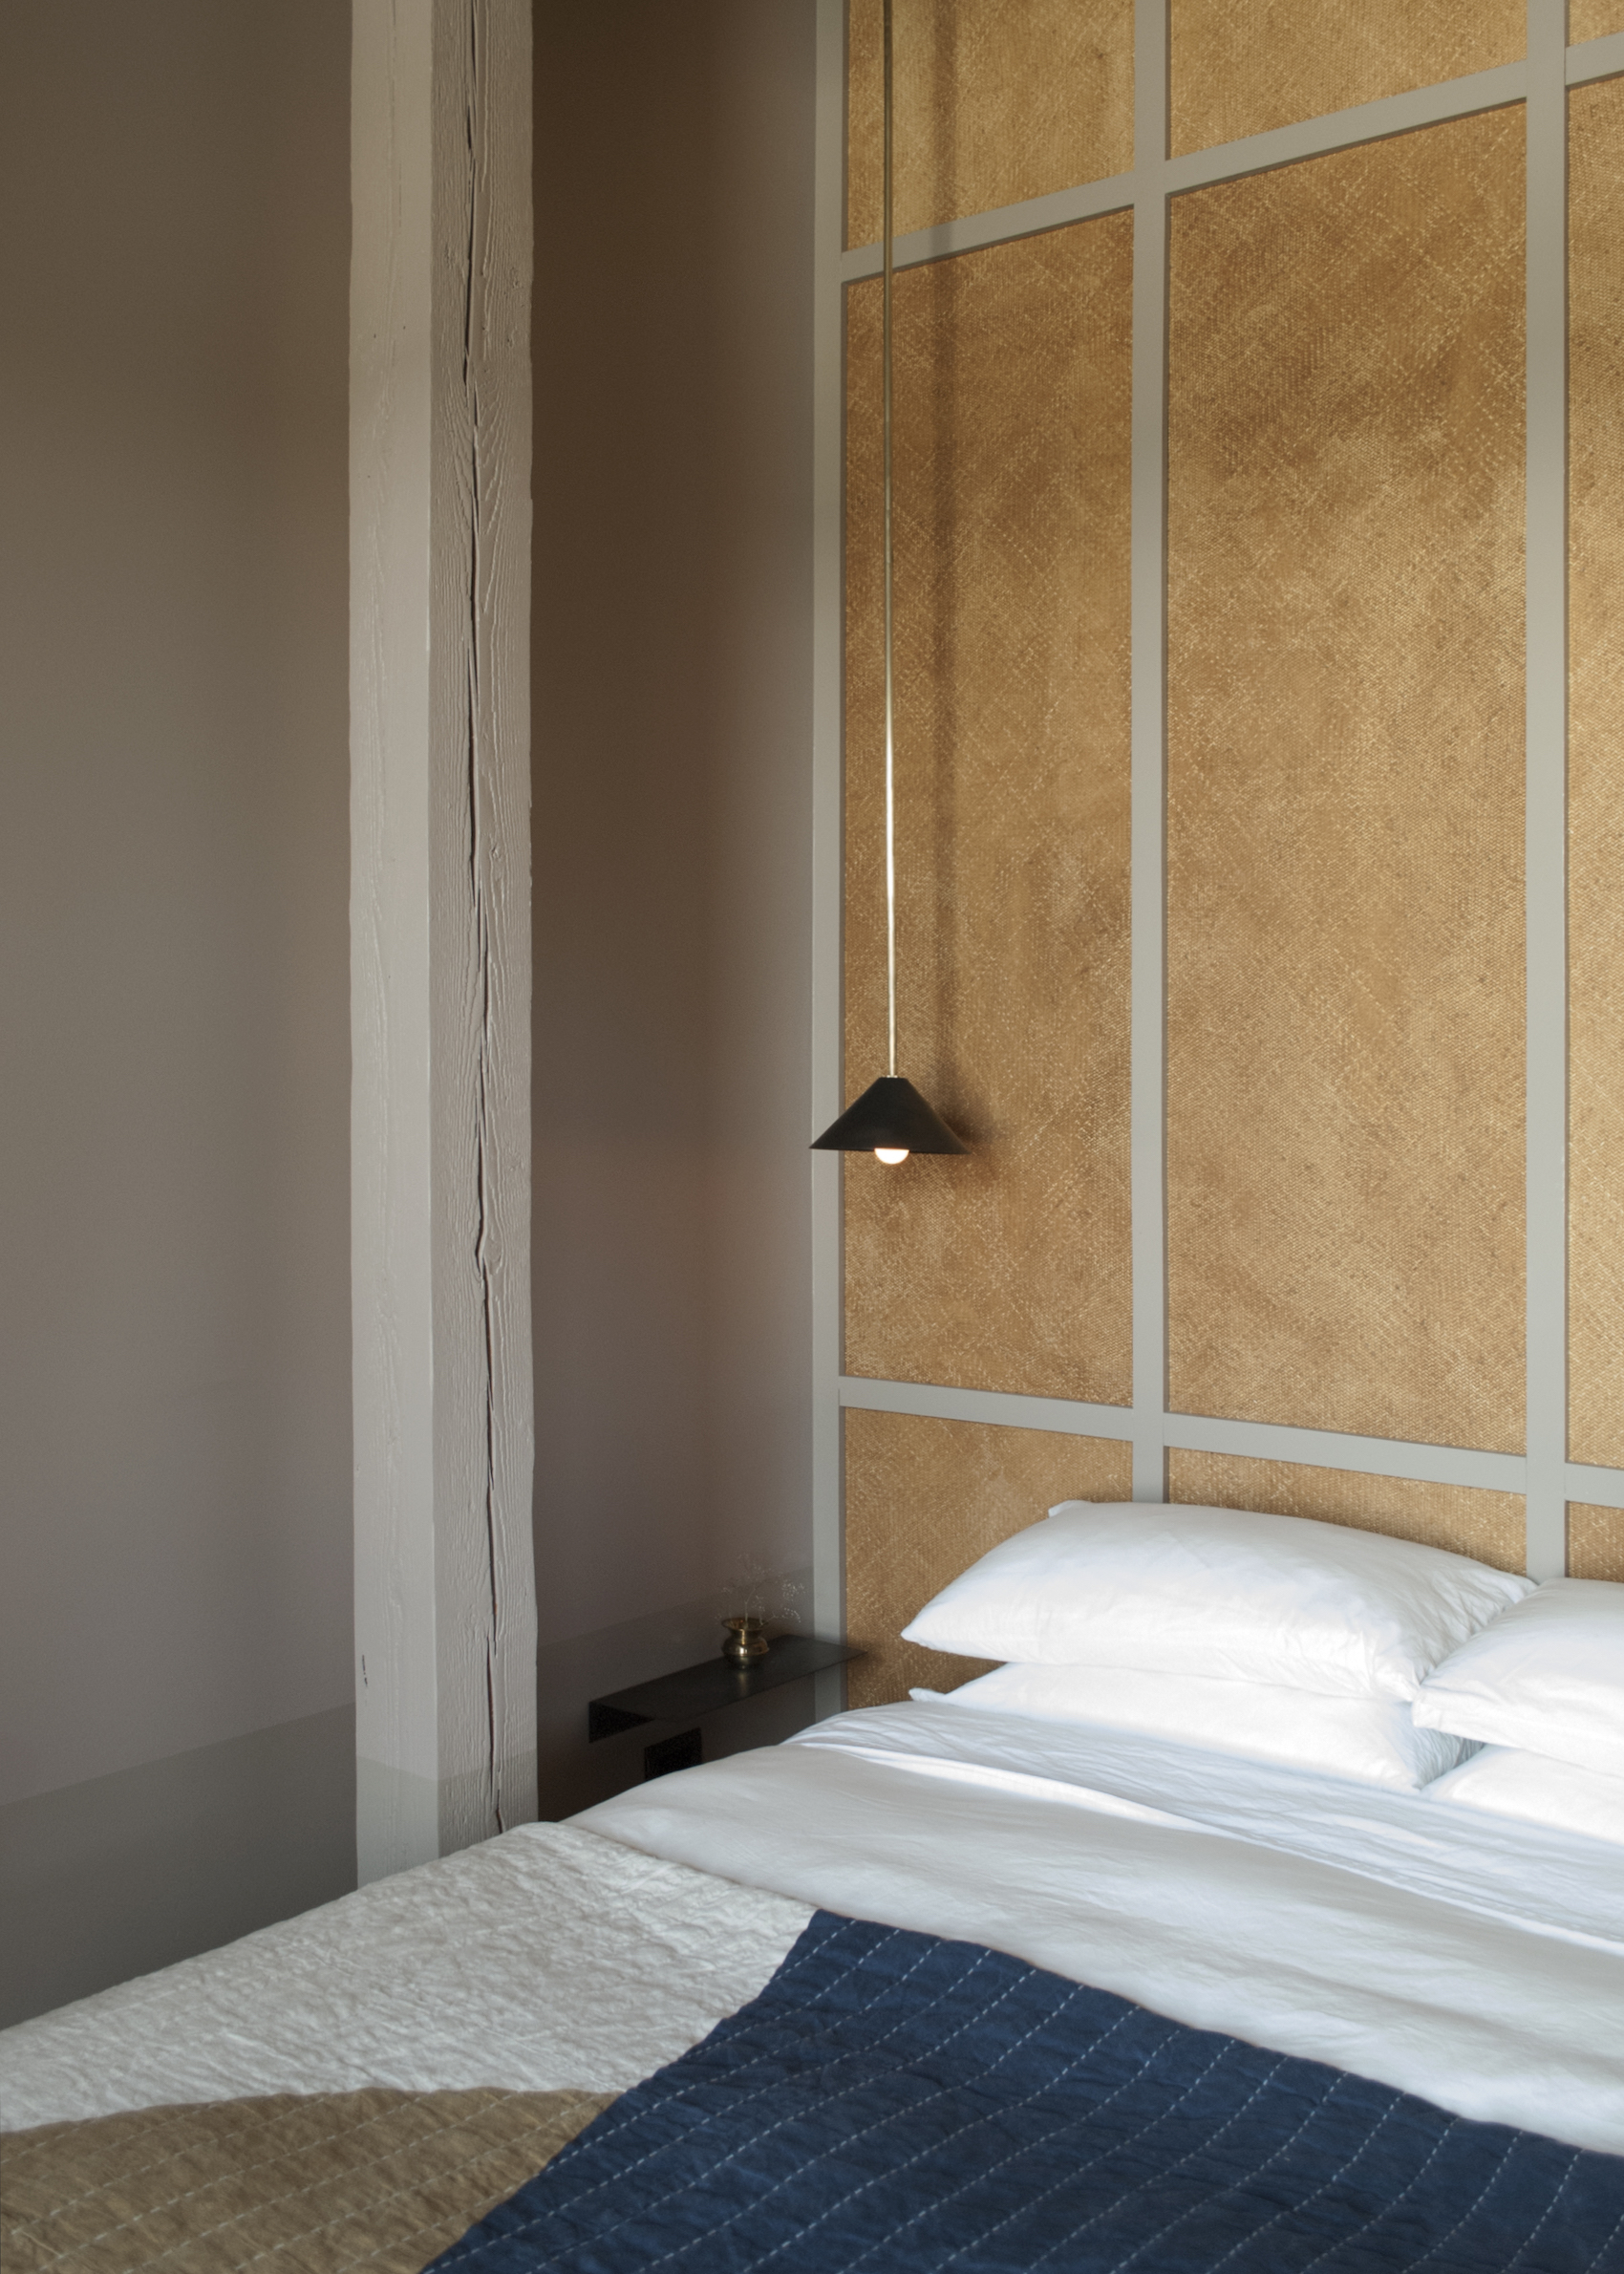 Jennings Hotel Room No. 1 by Coil + Drift